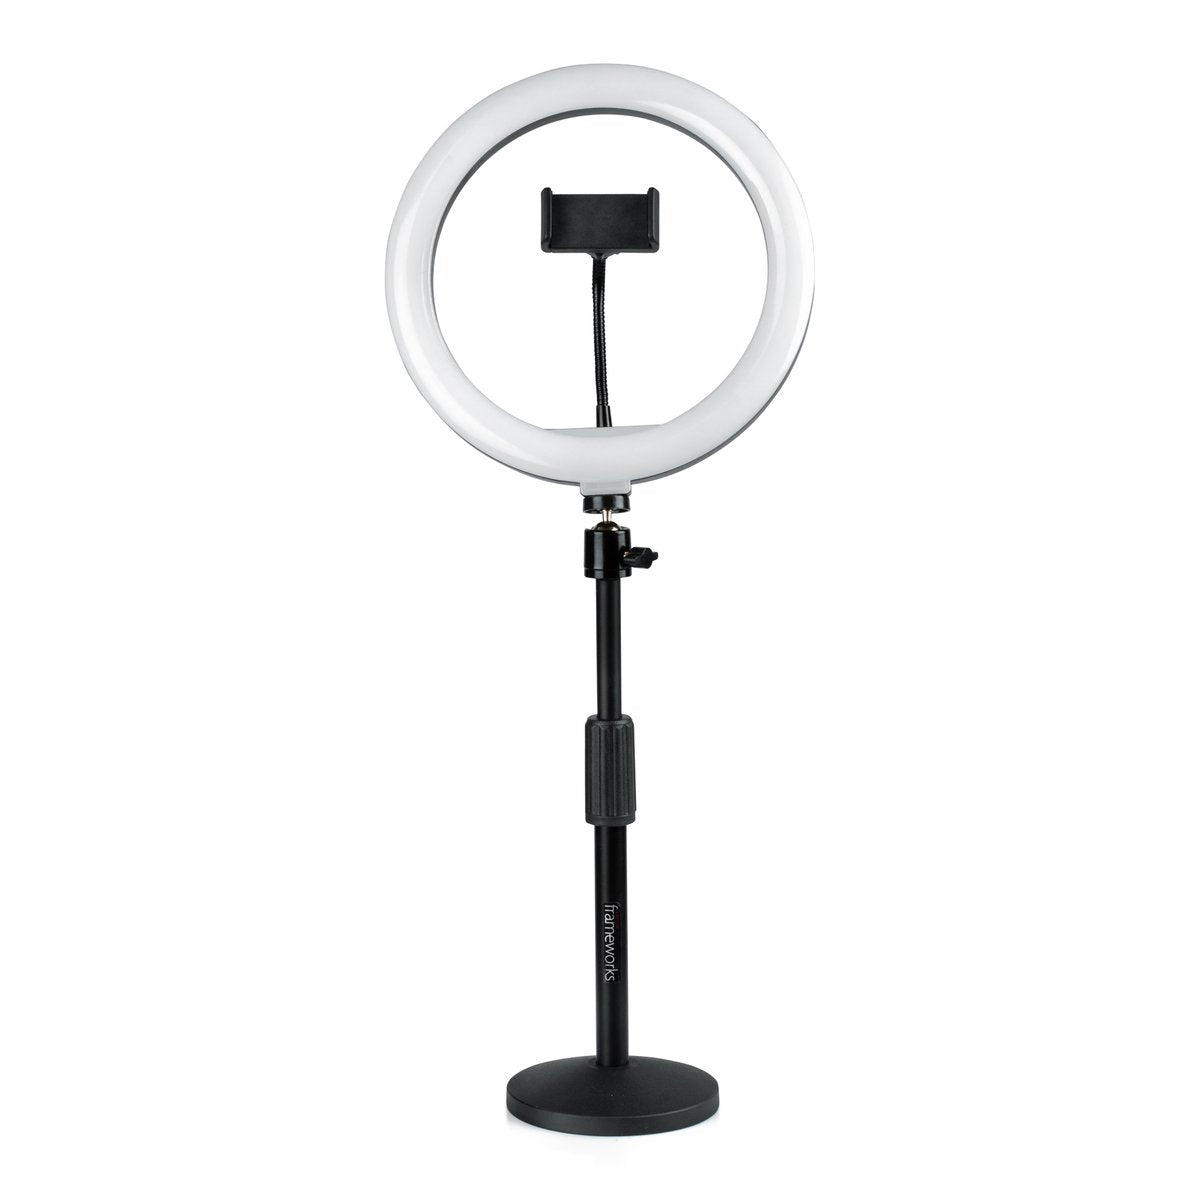 Set of Two (2) Height-Adjustable Stands with Pivoting LED Ring Lights and Universal Phone Holders